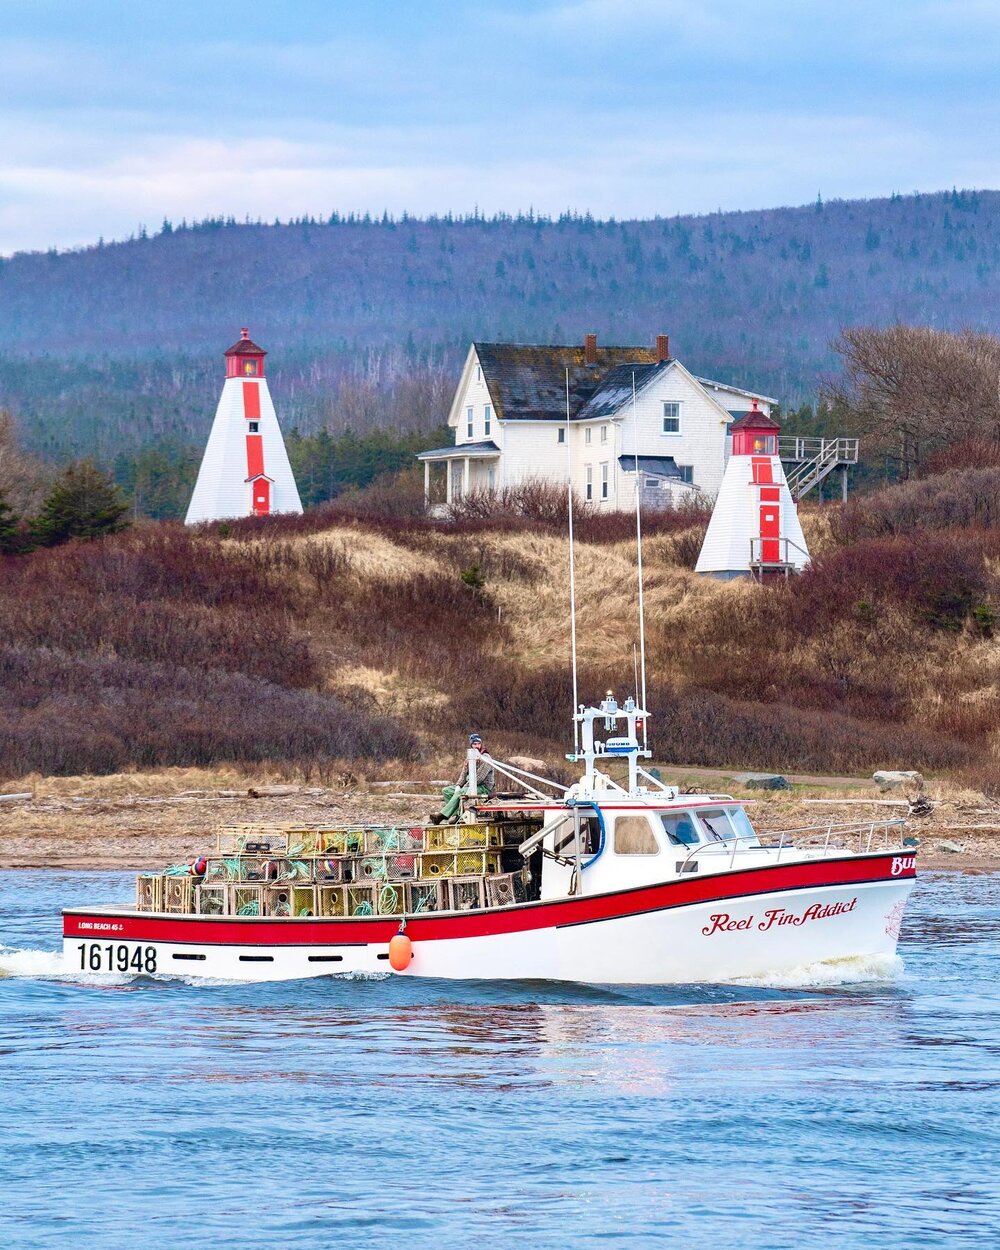 Fishing boats and lighthouses, what more could you ask for. Feeling happy + thankful to live by the ocean. Photos from Margaree Harbour Setting Day - the start of lobster fishing season. 🦞 May 6th, 2023

#capebreton #settingday #margaree #visitnovas